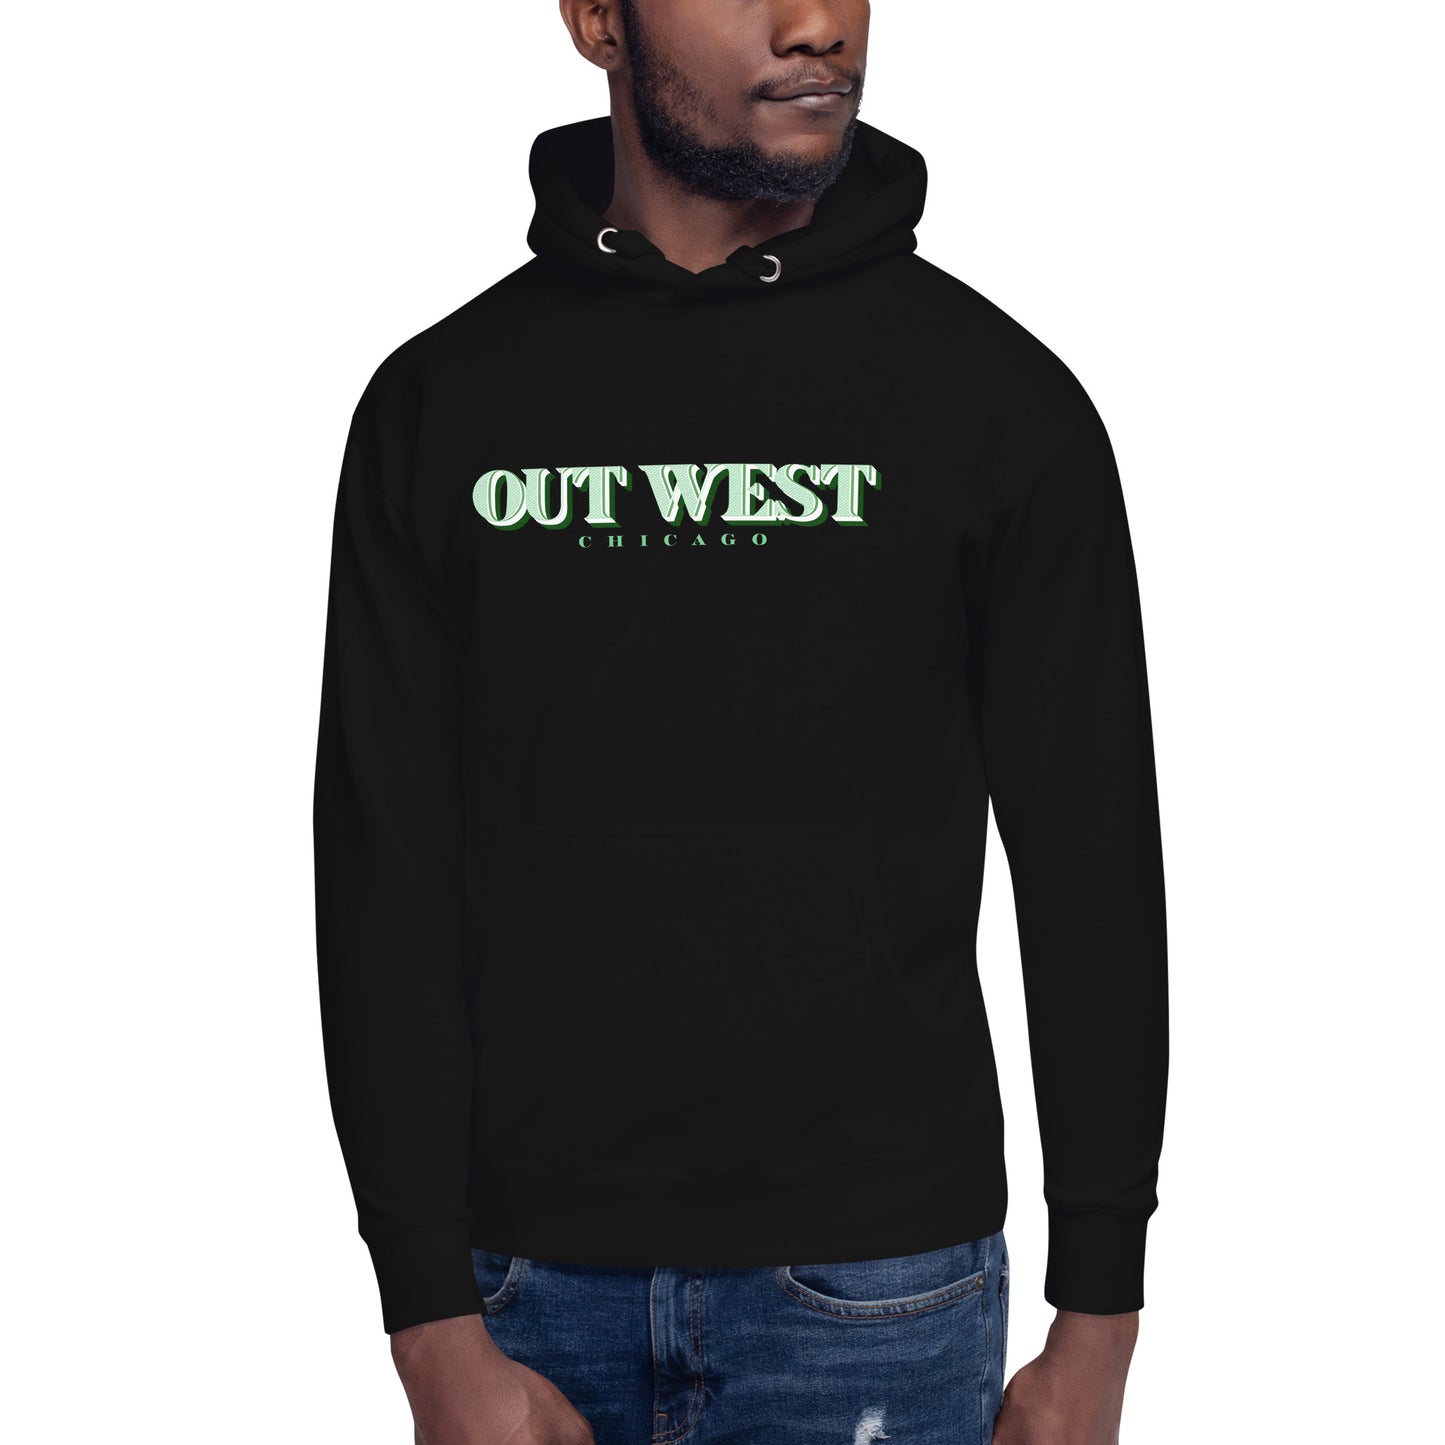 Out West Chicago Unisex Hoodie